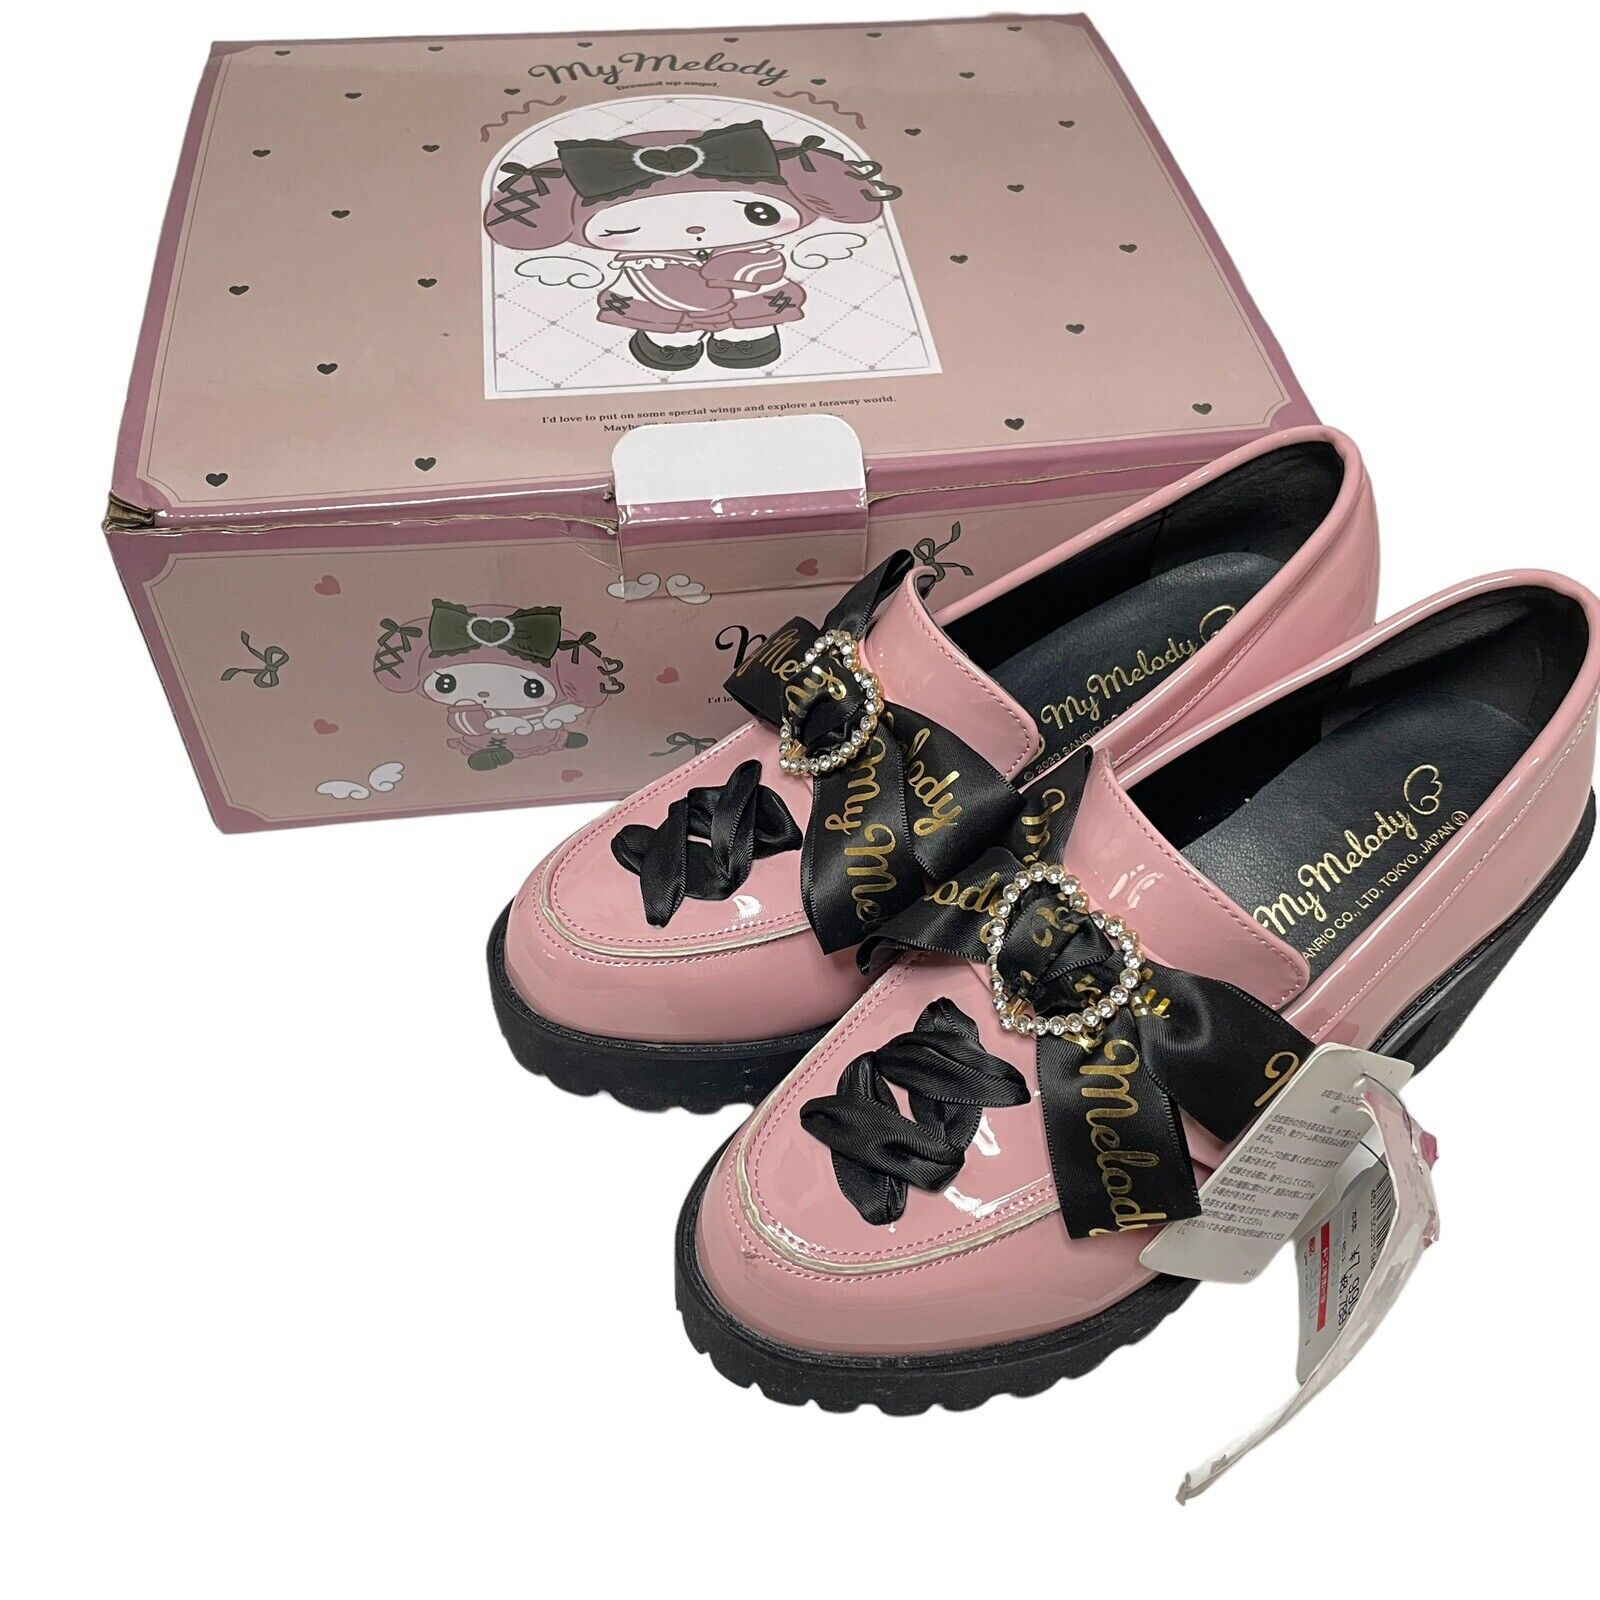 Omekashi Angel Series sanrio My melody Melokuro  Midnight loafers shoes Pink S